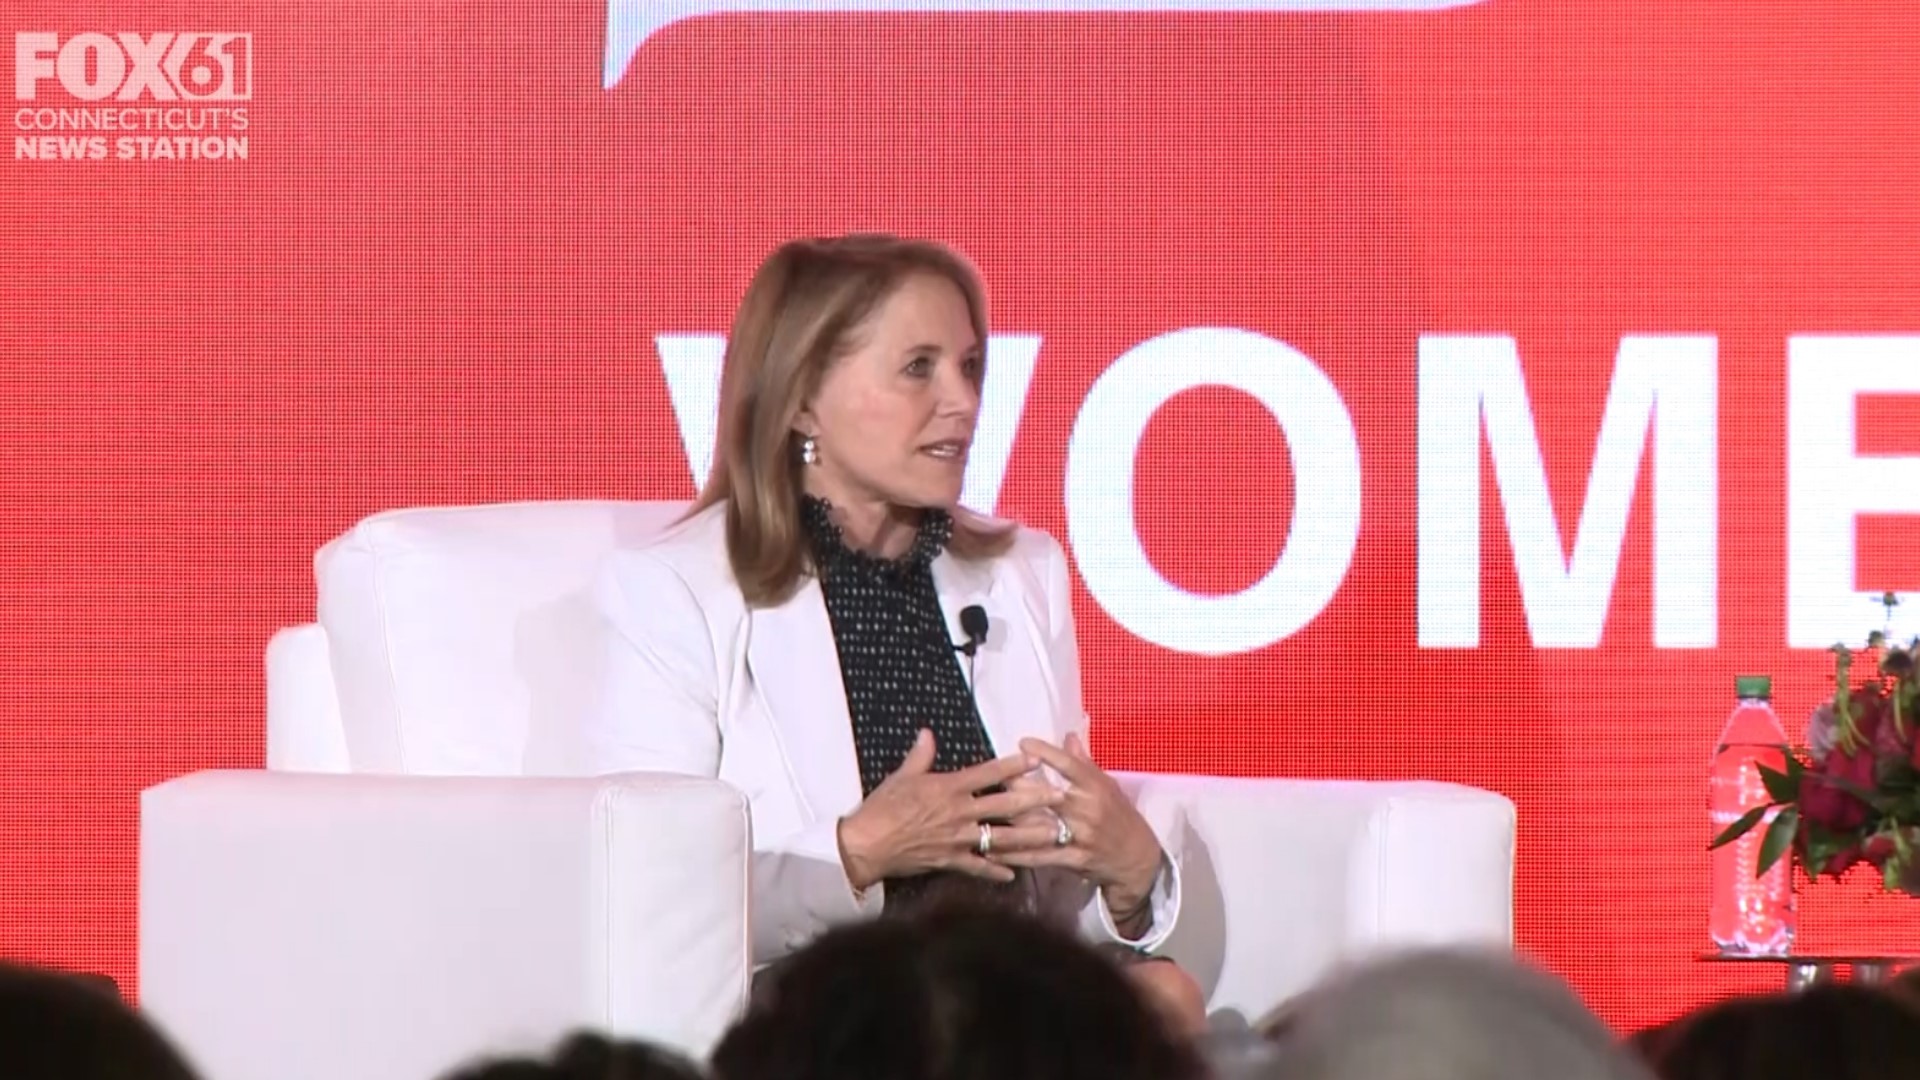 Award-winning journalist and author, Katie Couric, was this year's keynote speaker.